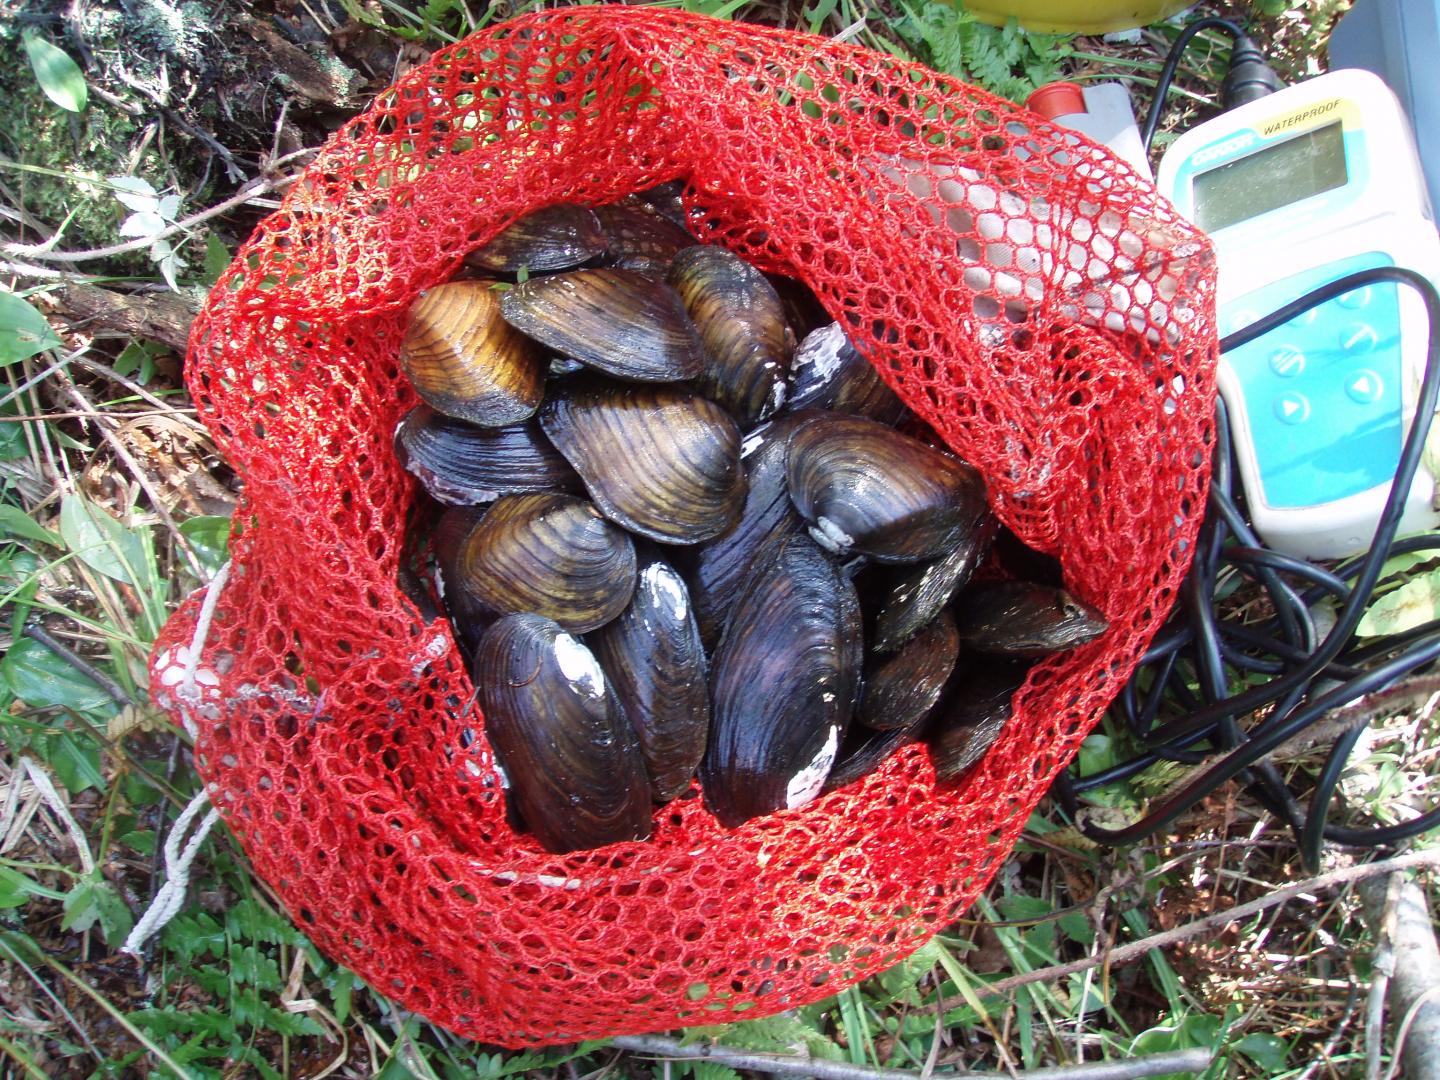 Spike and Wabash Pigtoe Mussels